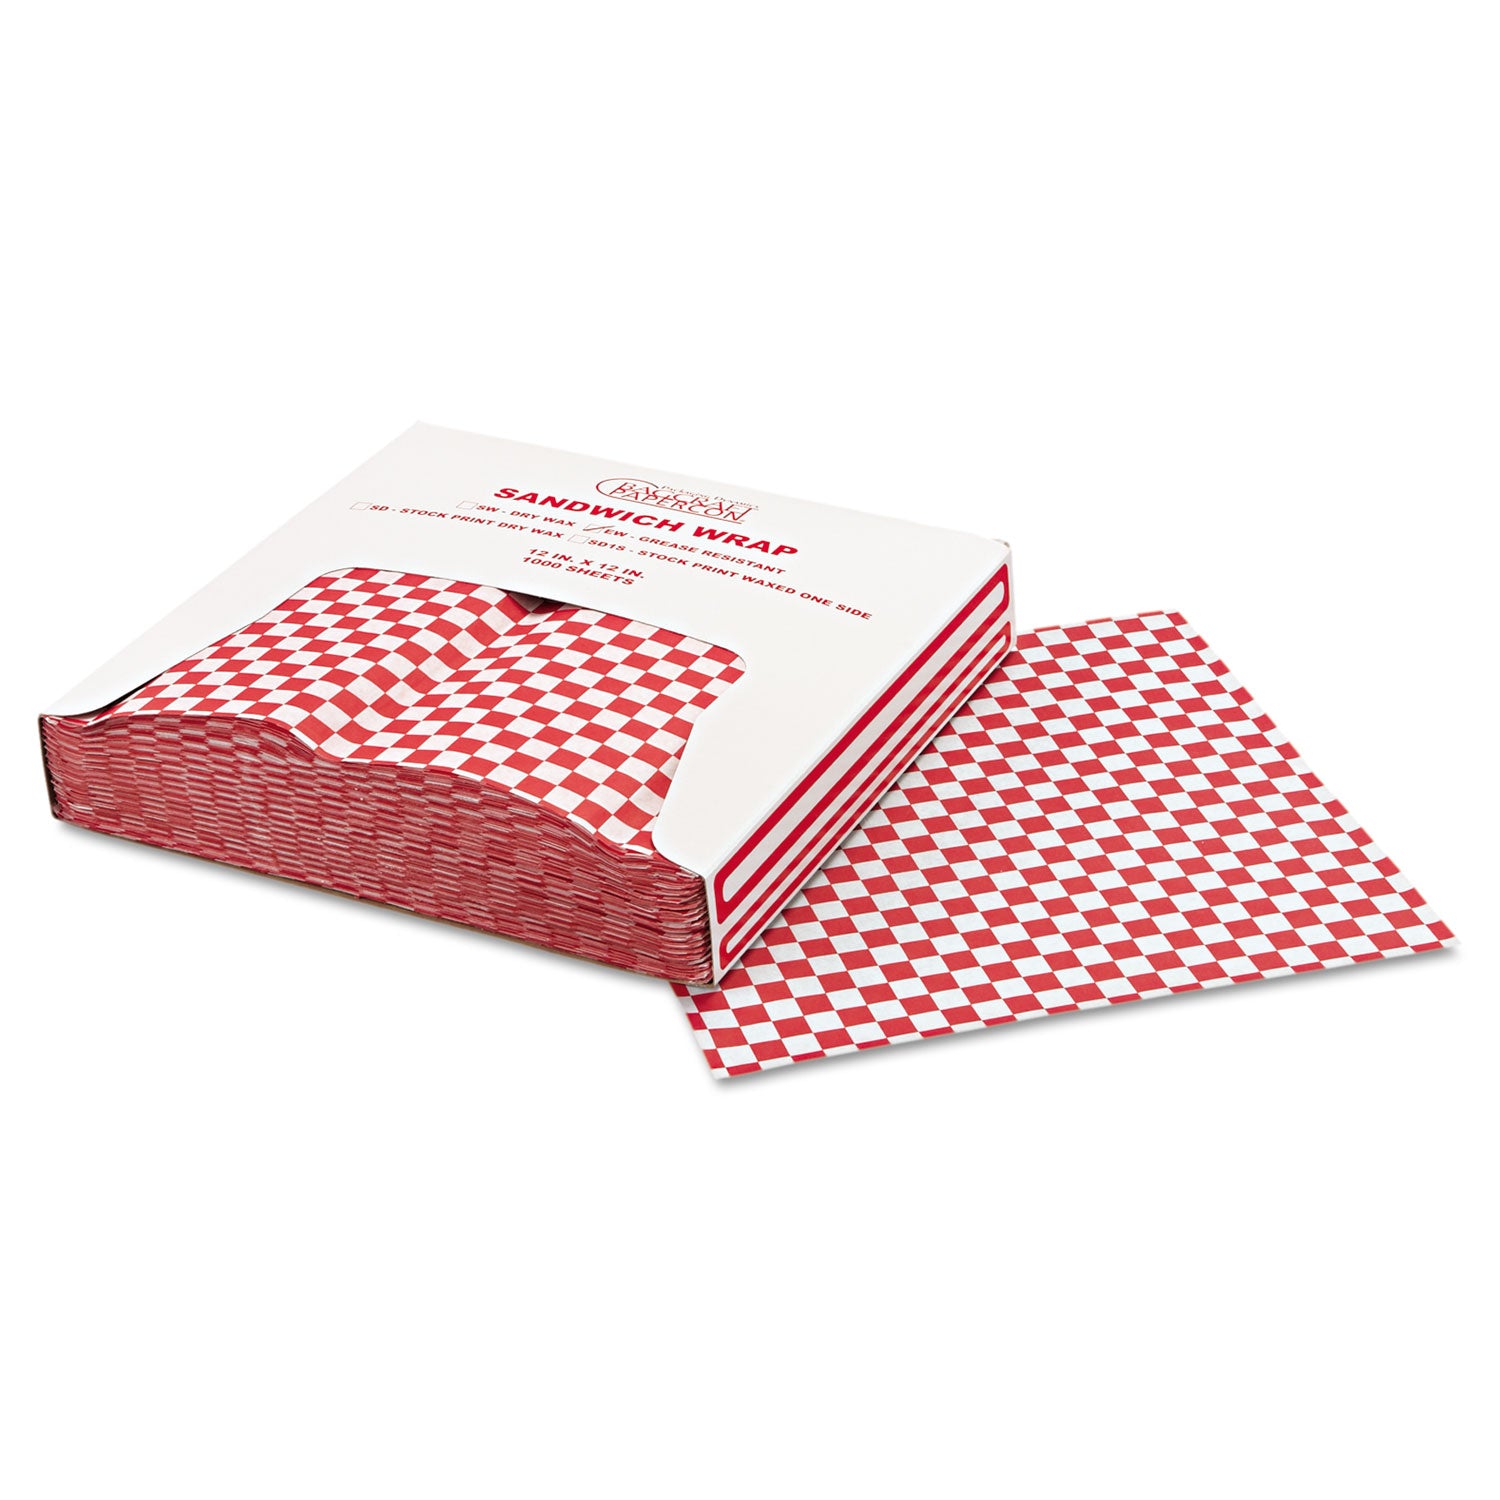 Grease-Resistant Paper Wraps and Liners, 12 x 12, Red Check, 1,000/Box, 5 Boxes/Carton - 